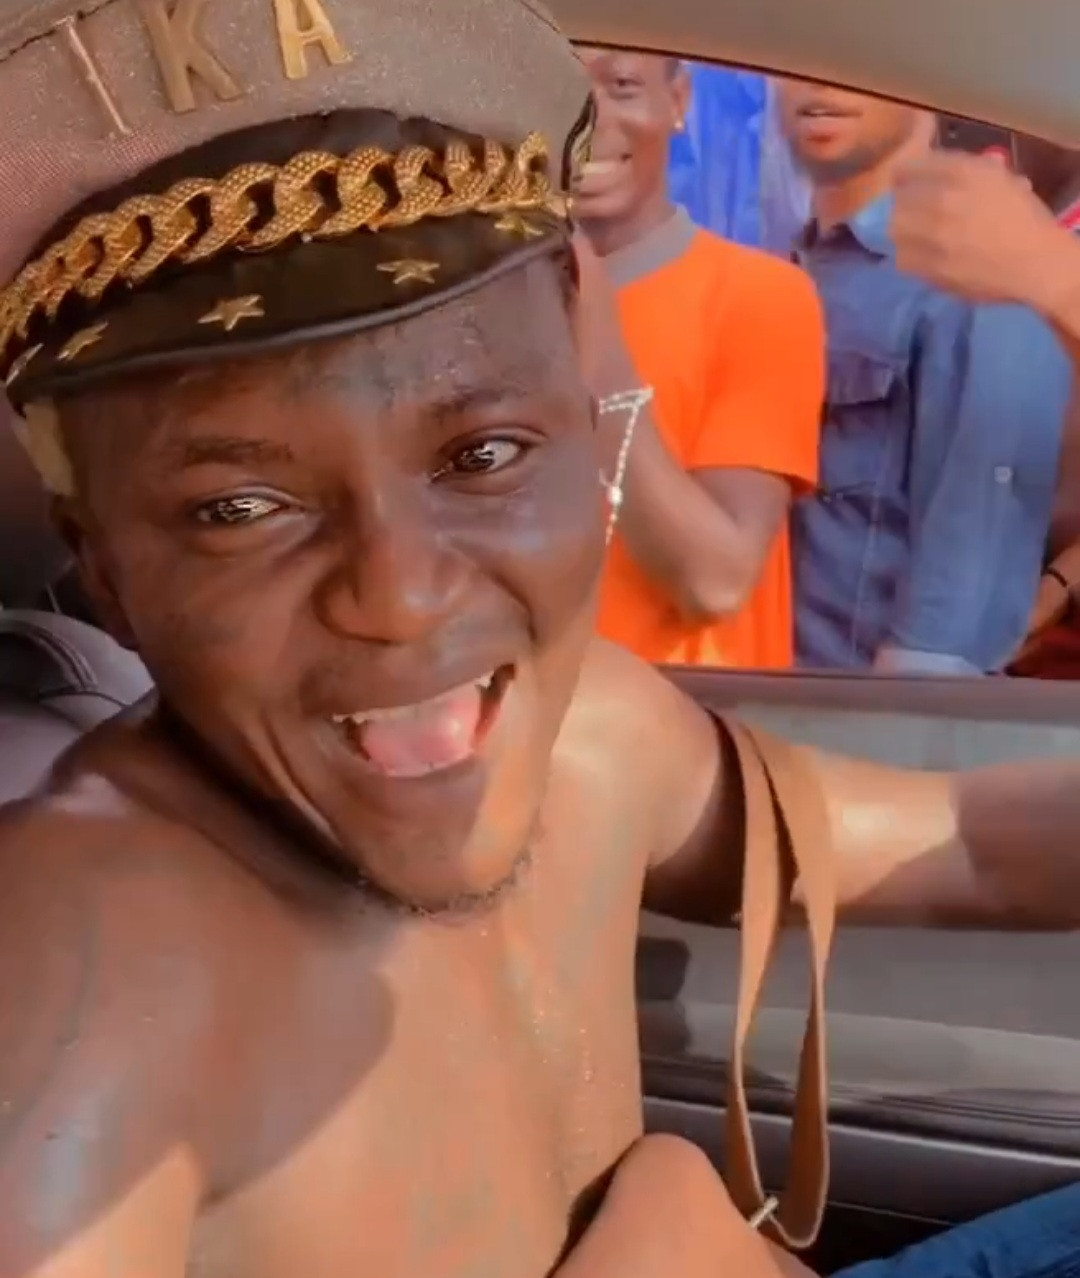 "Star dey sweat inside motor. I wan on AC, no fuel" Portable laments fuel scarcity as he queues to fill his tank